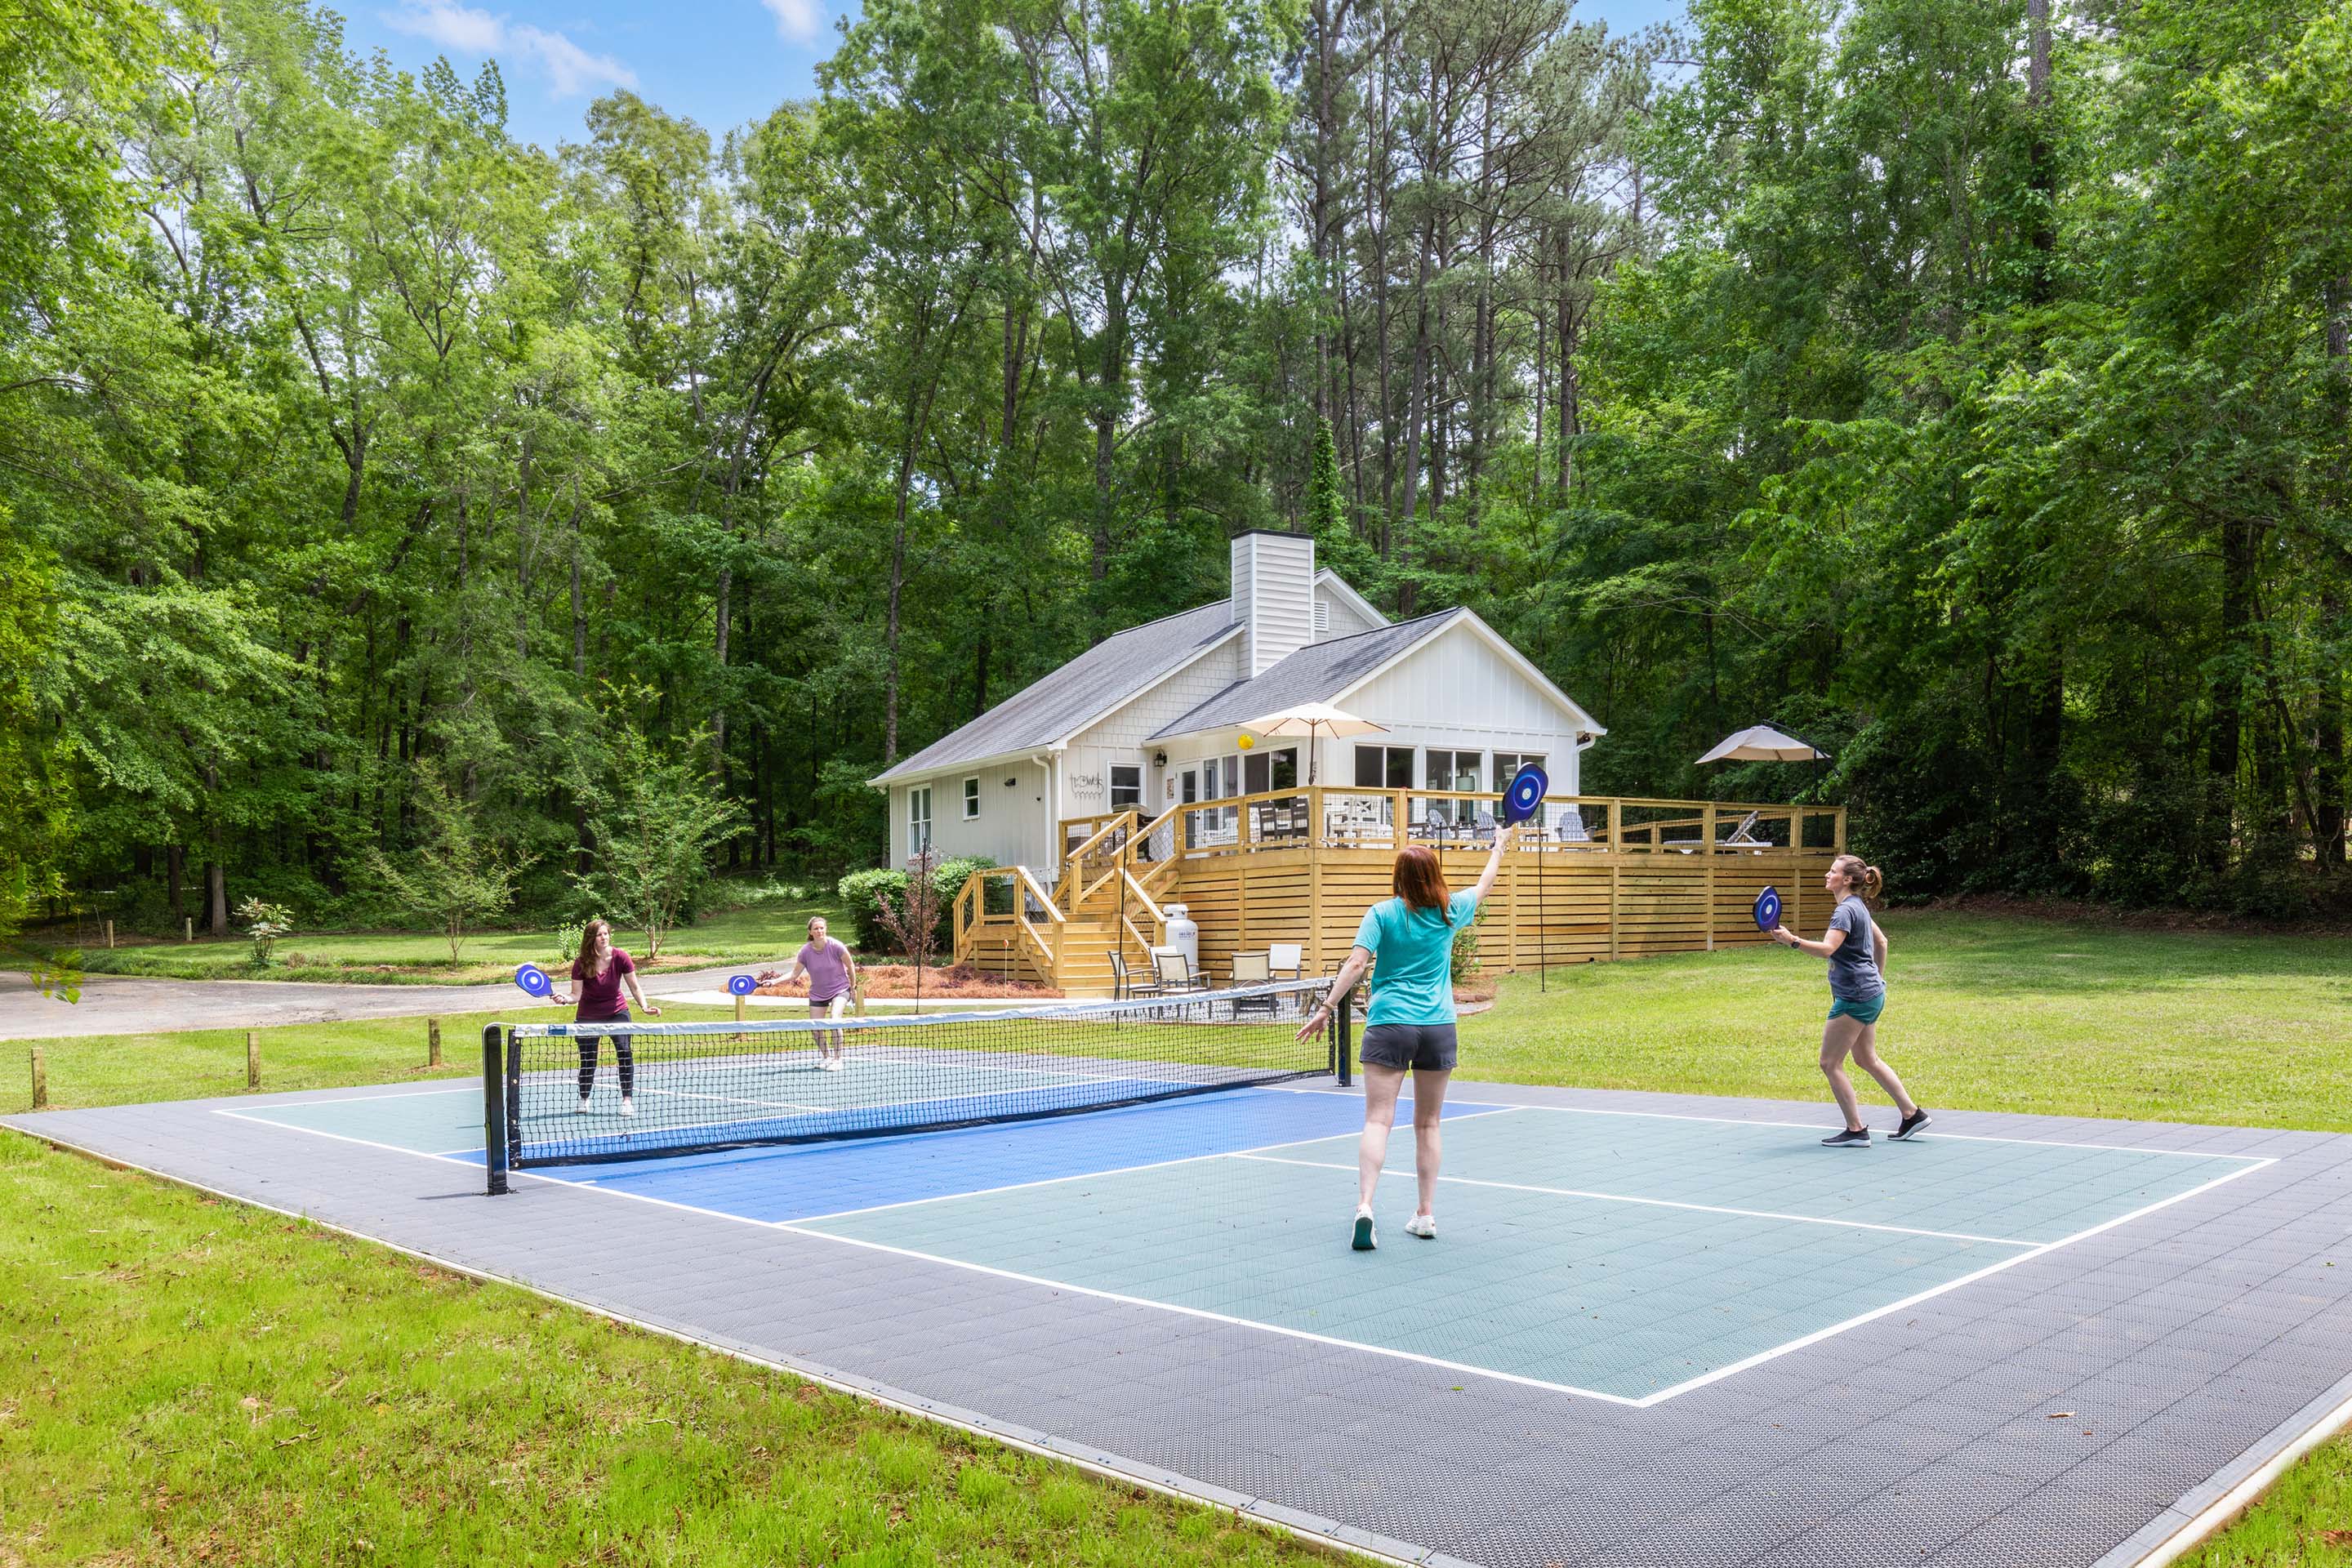 Amazing home with pickle ball court!